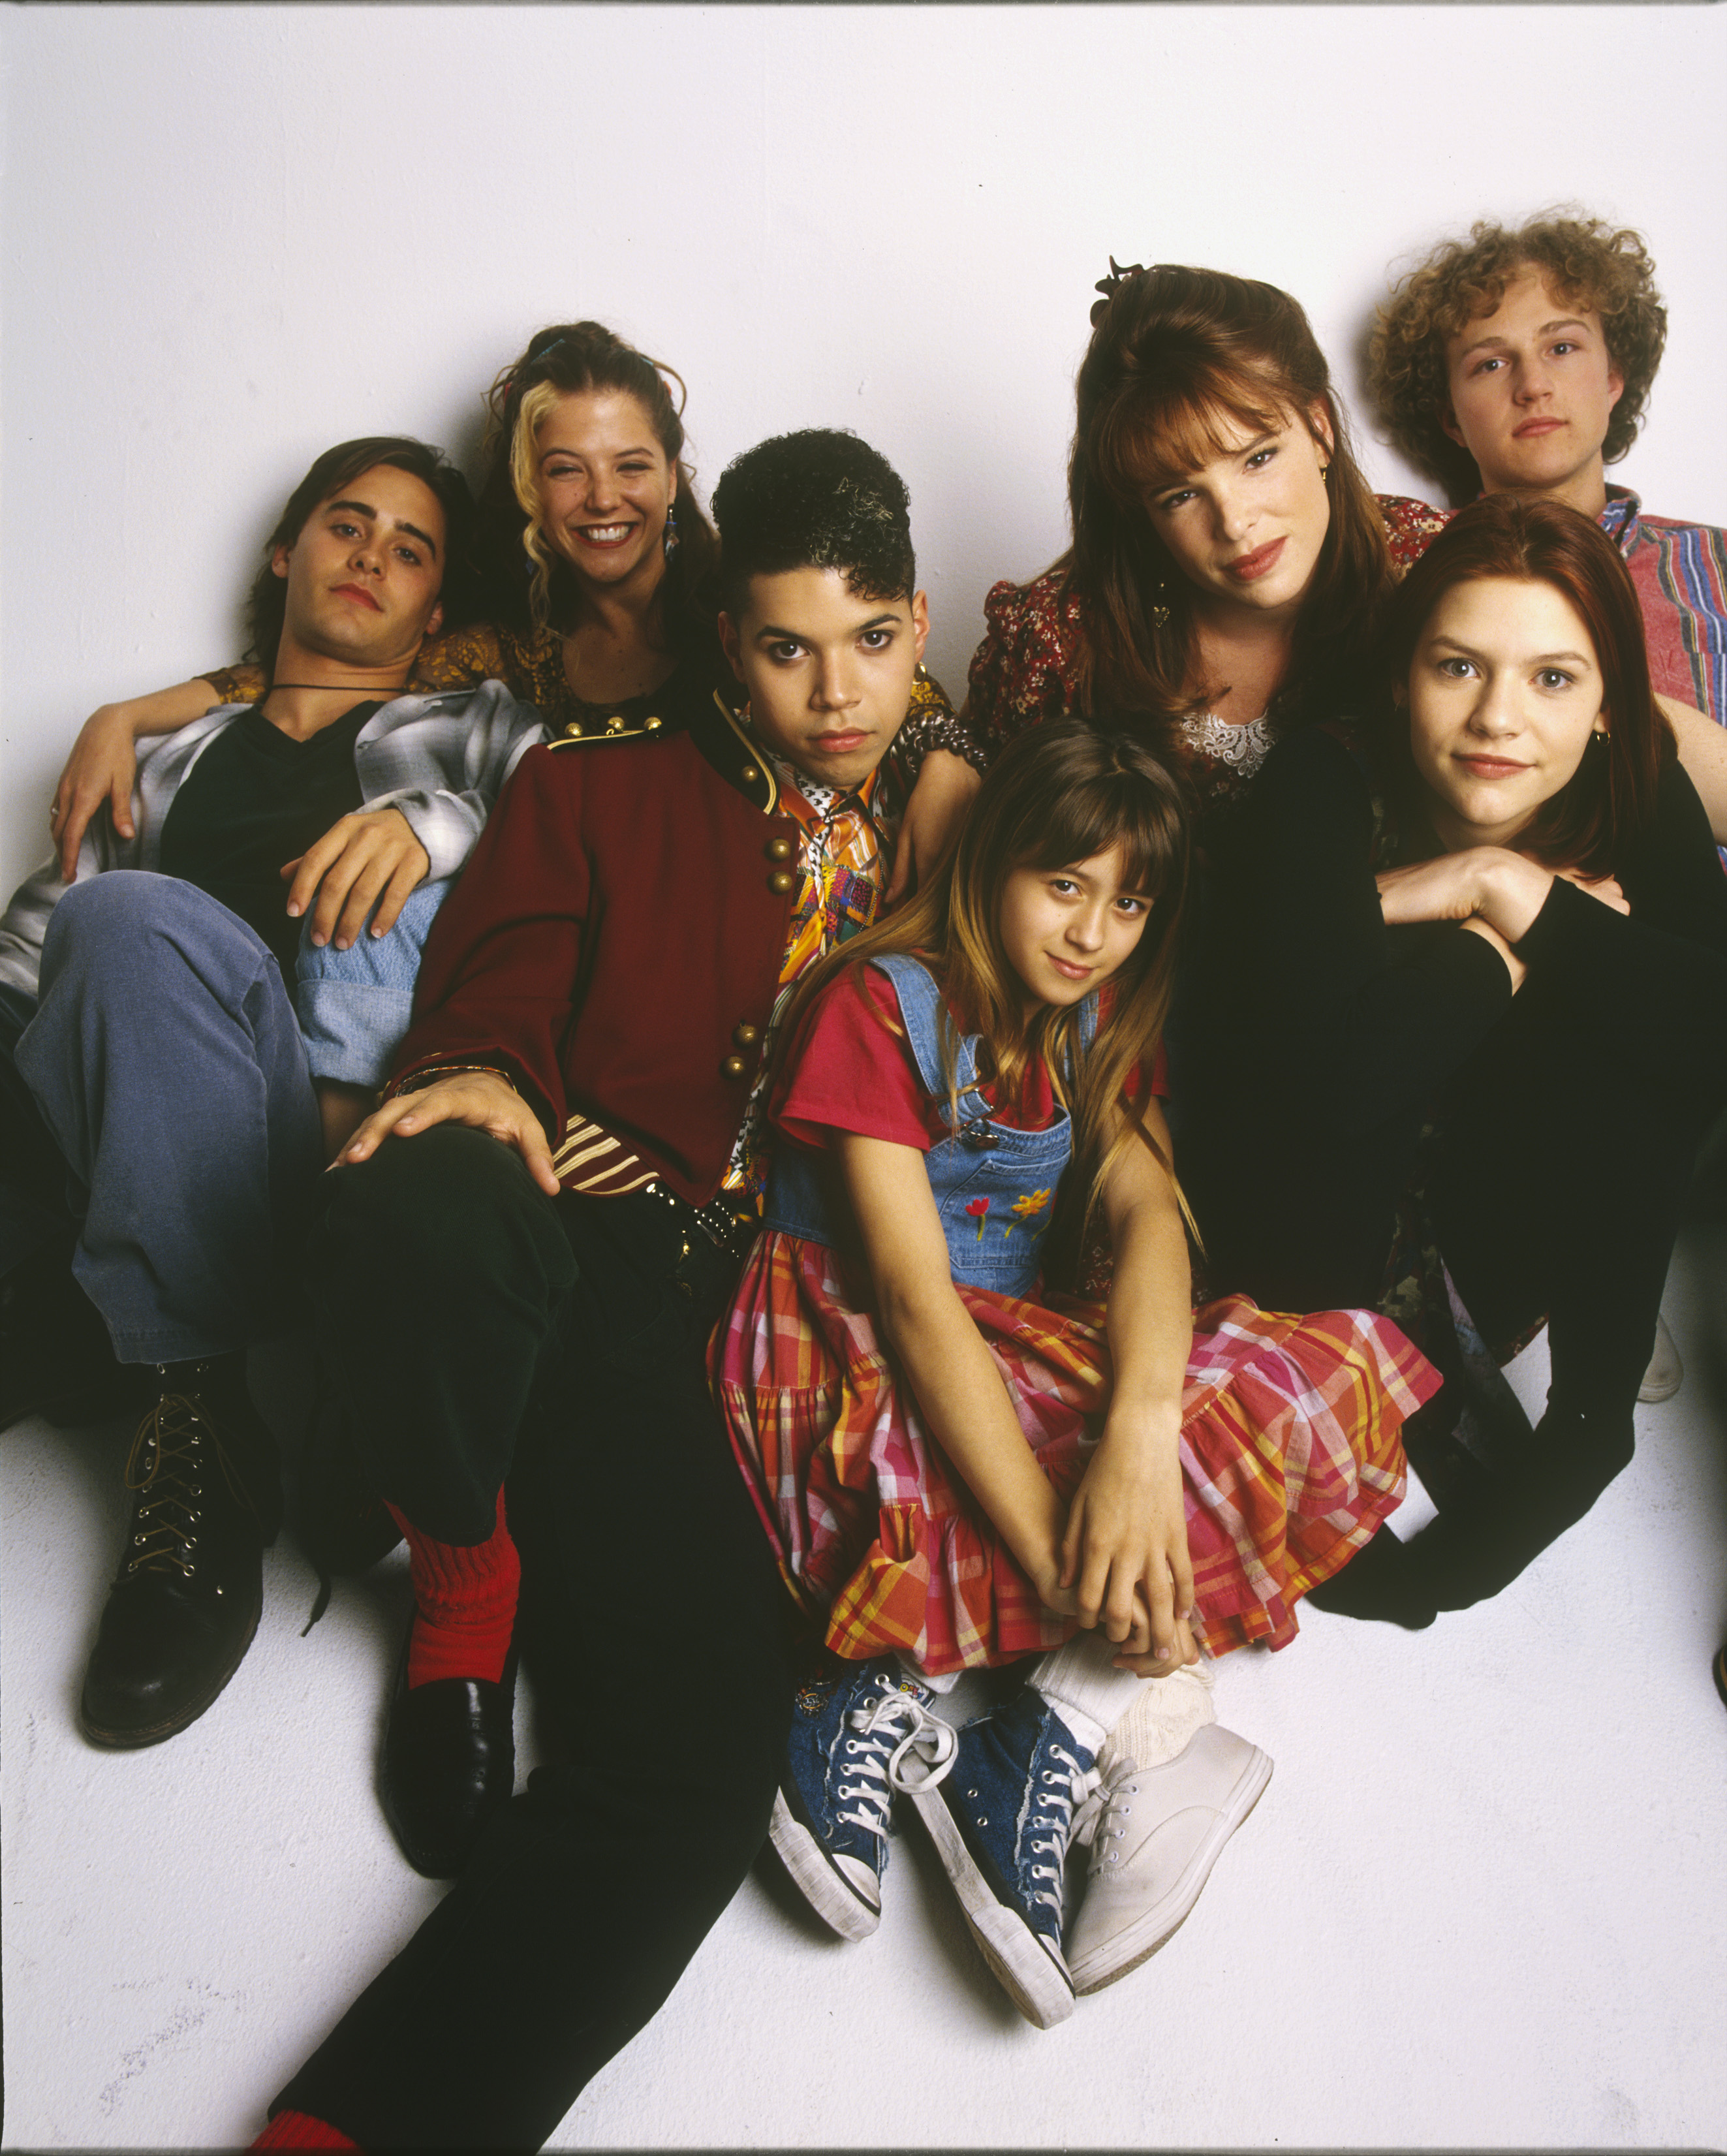 UNITED STATES - AUGUST 25:  MY SO-CALLED LIFE - gallery - 8/25/94, Claire Danes (second from right) played Angela Chase, a 15-year-old who wanted to break out of the mold as a strait-laced teen-ager and straight-A student. Pictured, left to right: Jason Leto (Jordan Catalano), A.J. Langer (Rayanne Graff), Wilson Cruz (Rickie Vasquez), Lisa Wilhoit (Danielle Chase), Devon Odessa (Sharon Cherski), Claire Danes (Angela Chase), Devon Gummersall (Brian Krakow),  (Photo by Mark Seliger/ABC via Getty Images) (Mark Seliger&mdash;ABC via Getty Images)